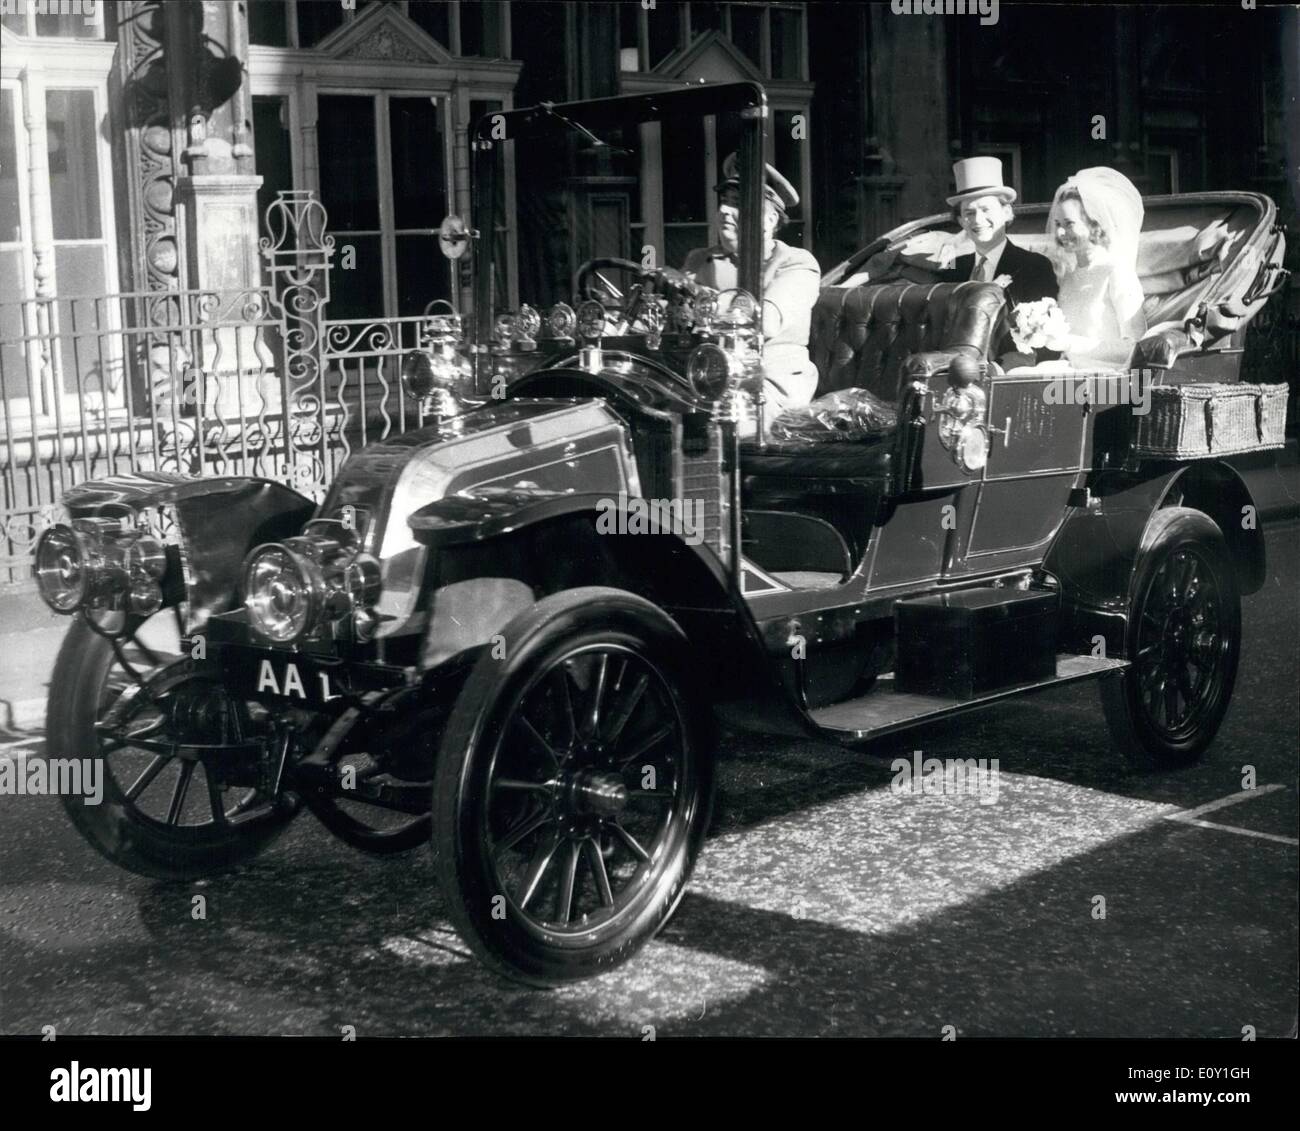 Mar. 03, 1968 - Veteran Car At AA Wedding: The Automobile Association's 1904 Renault car was an appropriate wedding carriage for the AA director general's only daughter, Miss Juliet Durie, 26, and Mr. John Grenville Napier, 29,m son of the later Lt, Col. Lord Napier and Patrick. After their marriage yesterday at St; Jame's Piccadilly, the couple were driven in it to a reception at Quaglino's Bury Street. Stock Photo